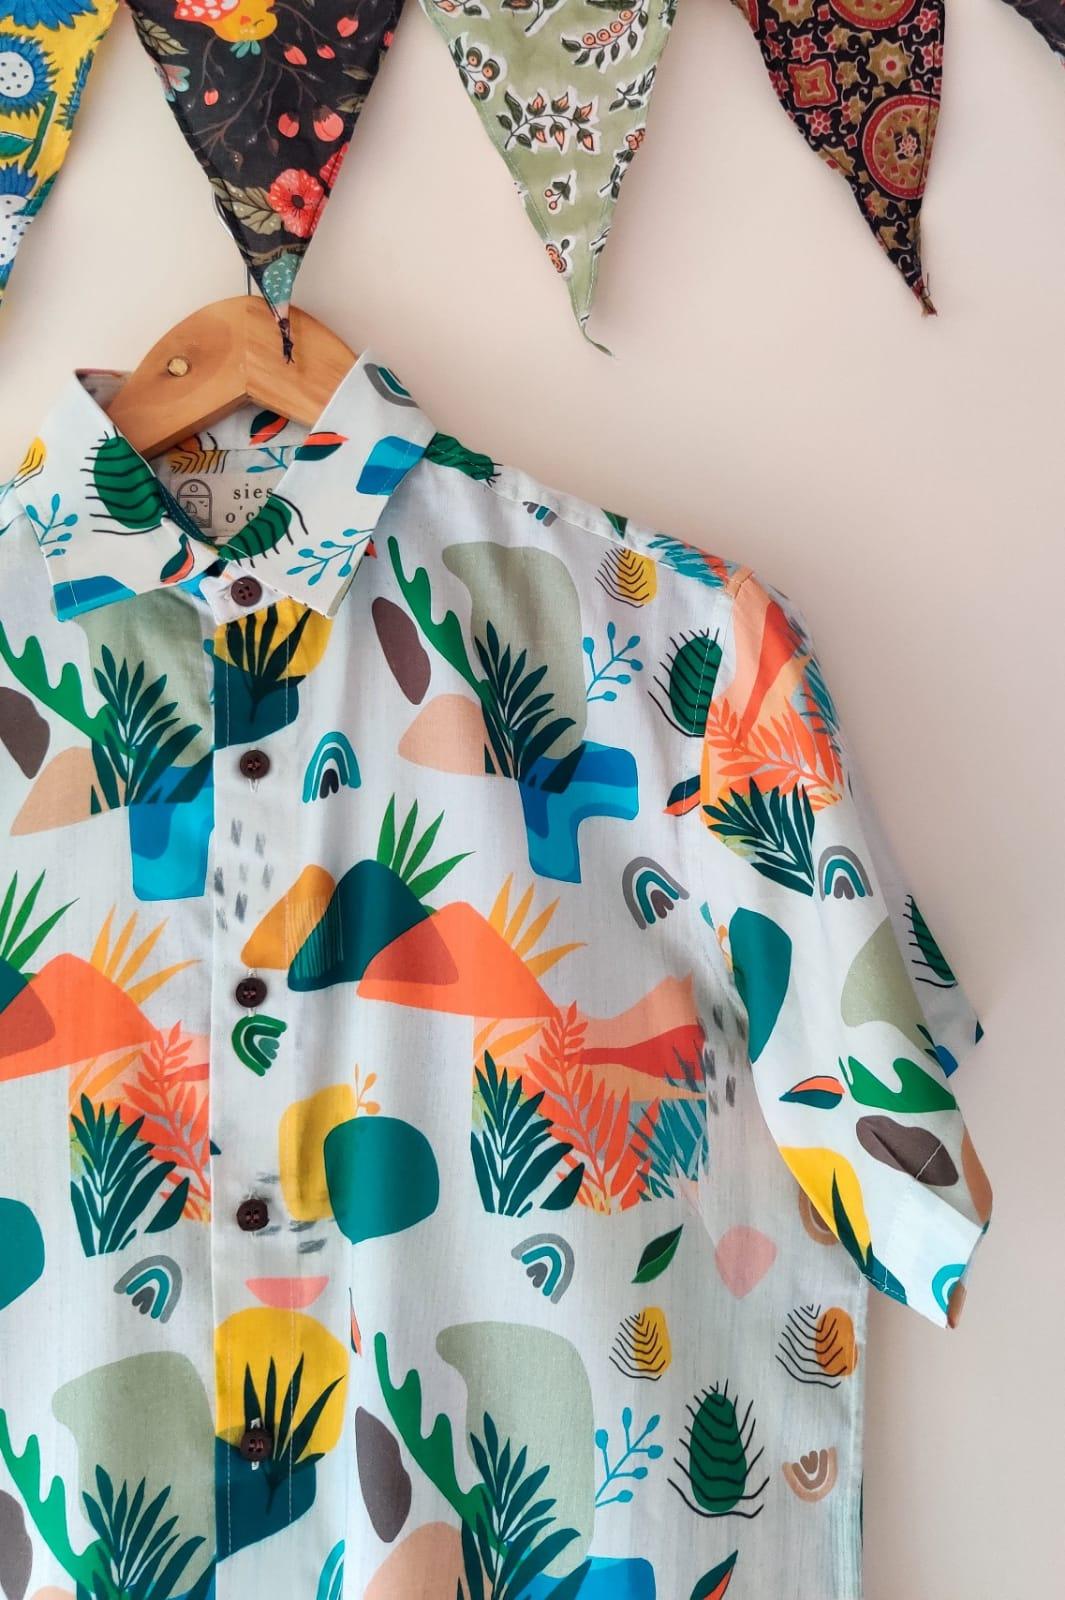 Vagator Sunsets by Siesta o'Clock - the perfect shirt for Sunday brunch